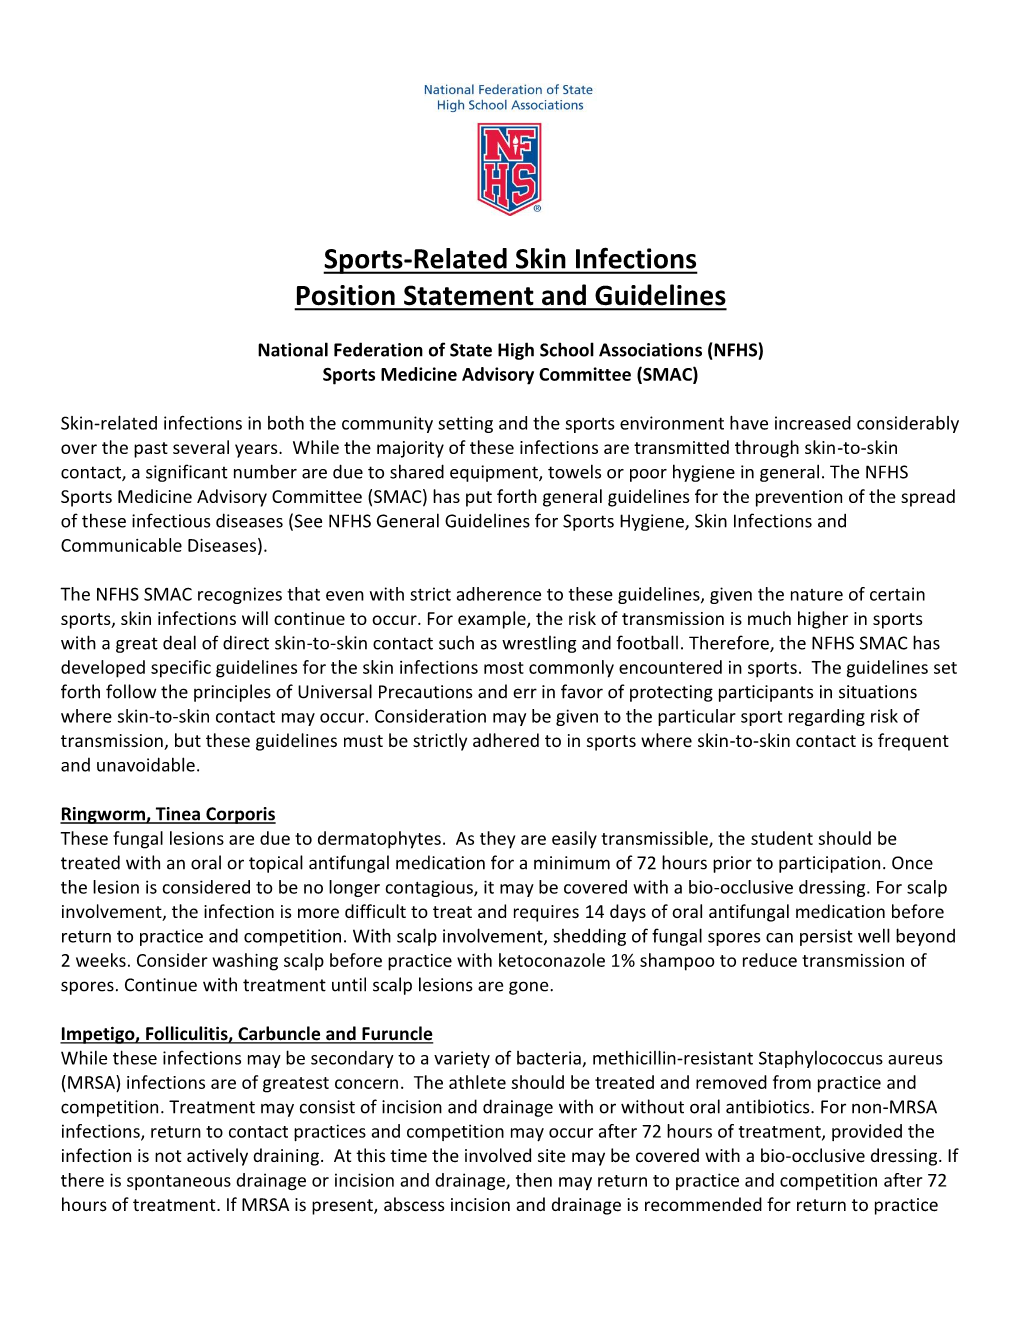 Sports Related Skin Infections Position Statement And